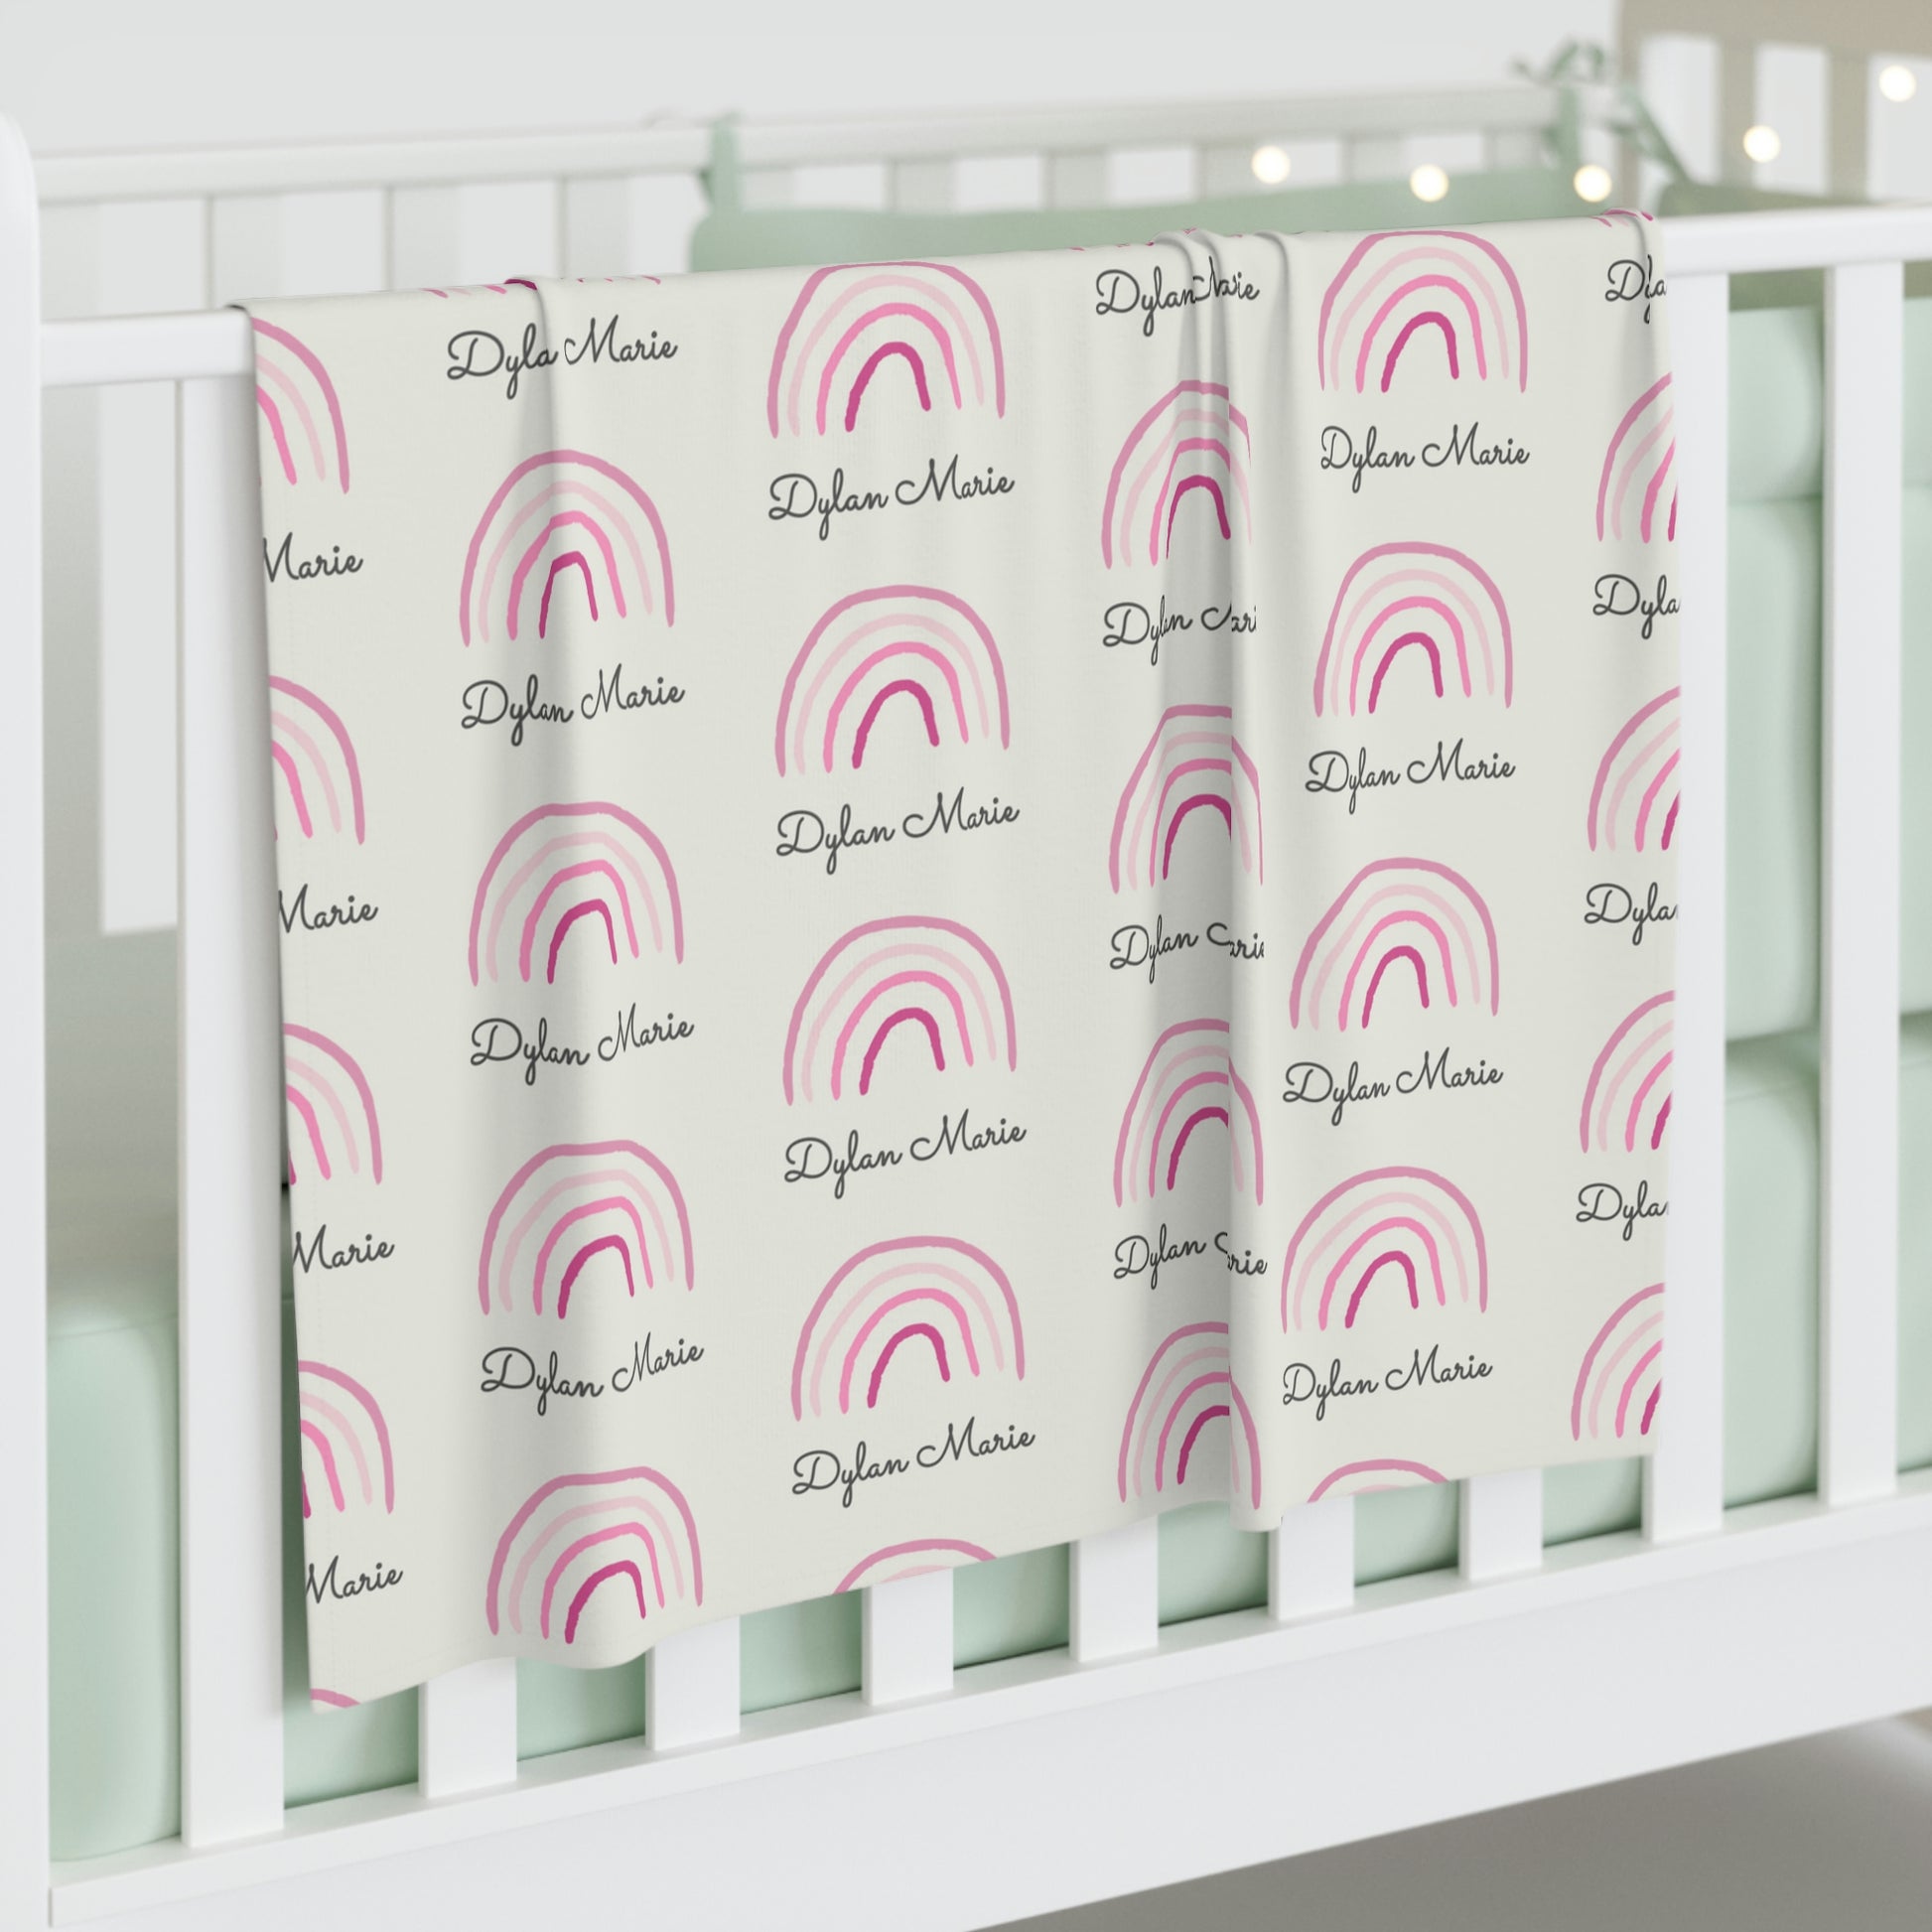 Jersey personalized baby blanket in pink rainbow pattern hung over side of white crib